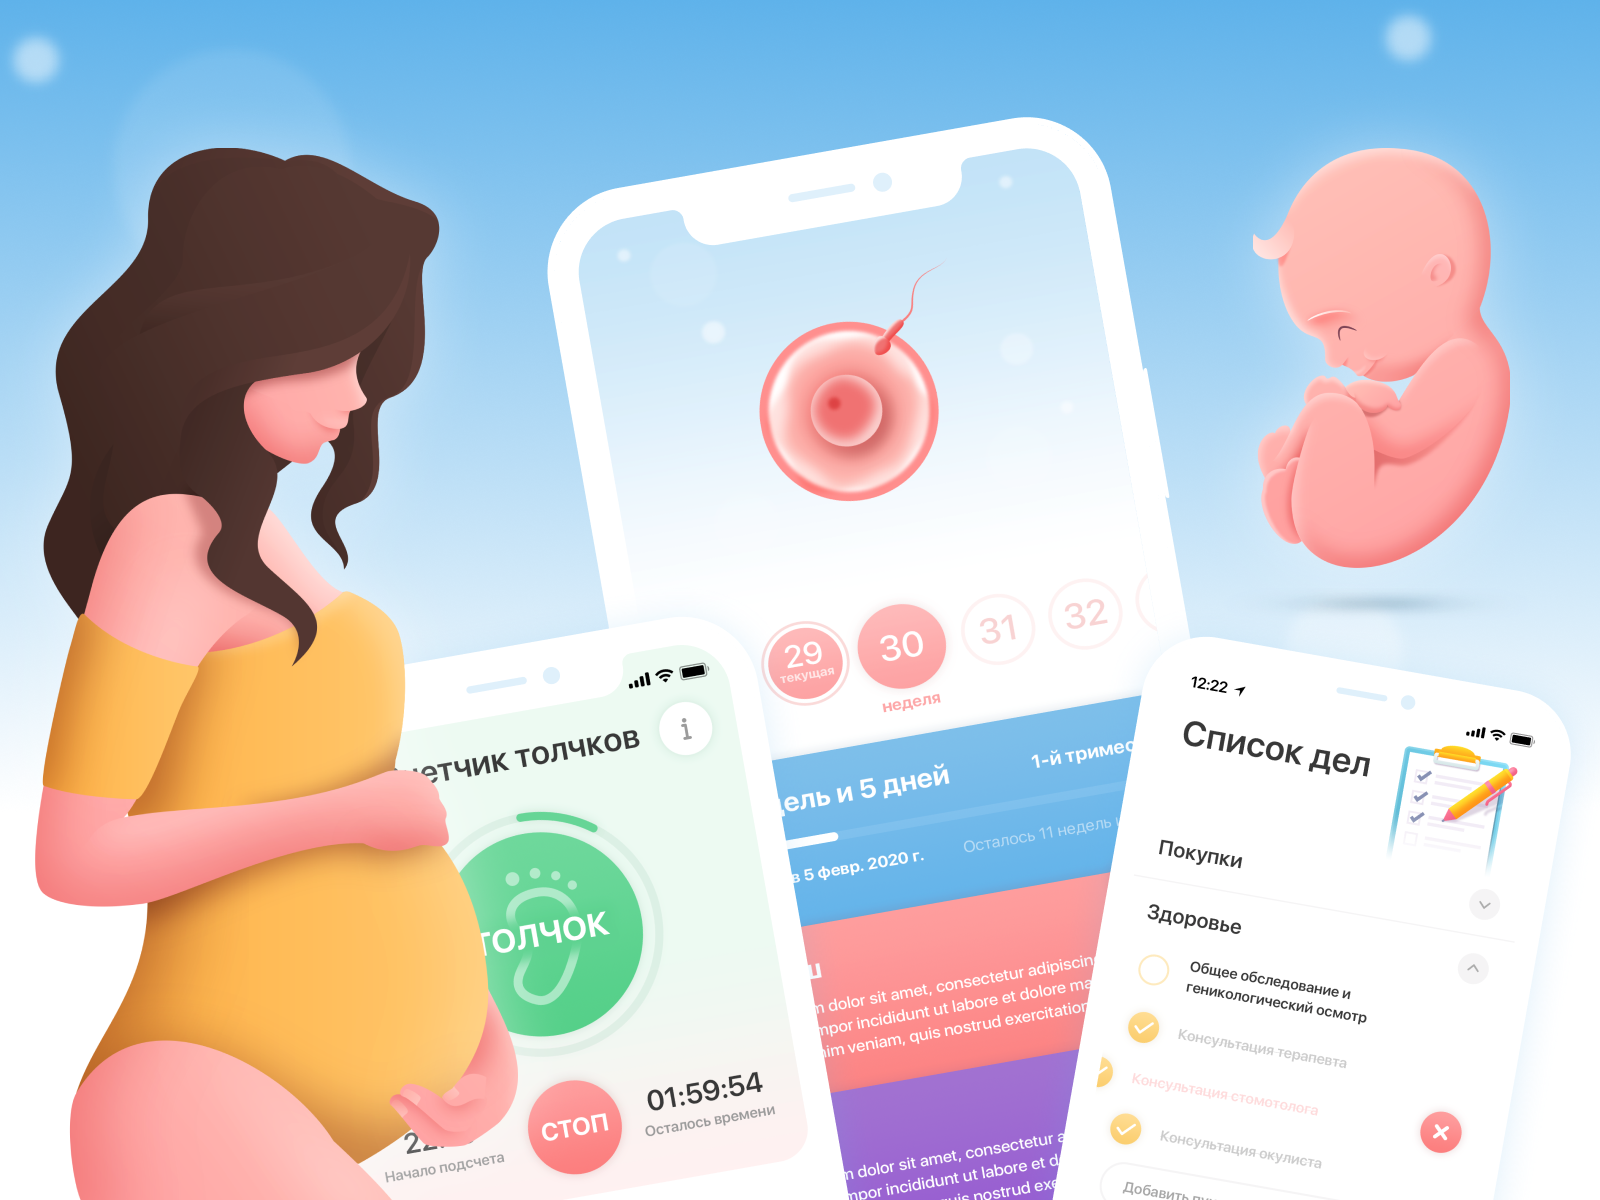 My pregnancy calendar for every week by Mihail Ivlev on Dribbble